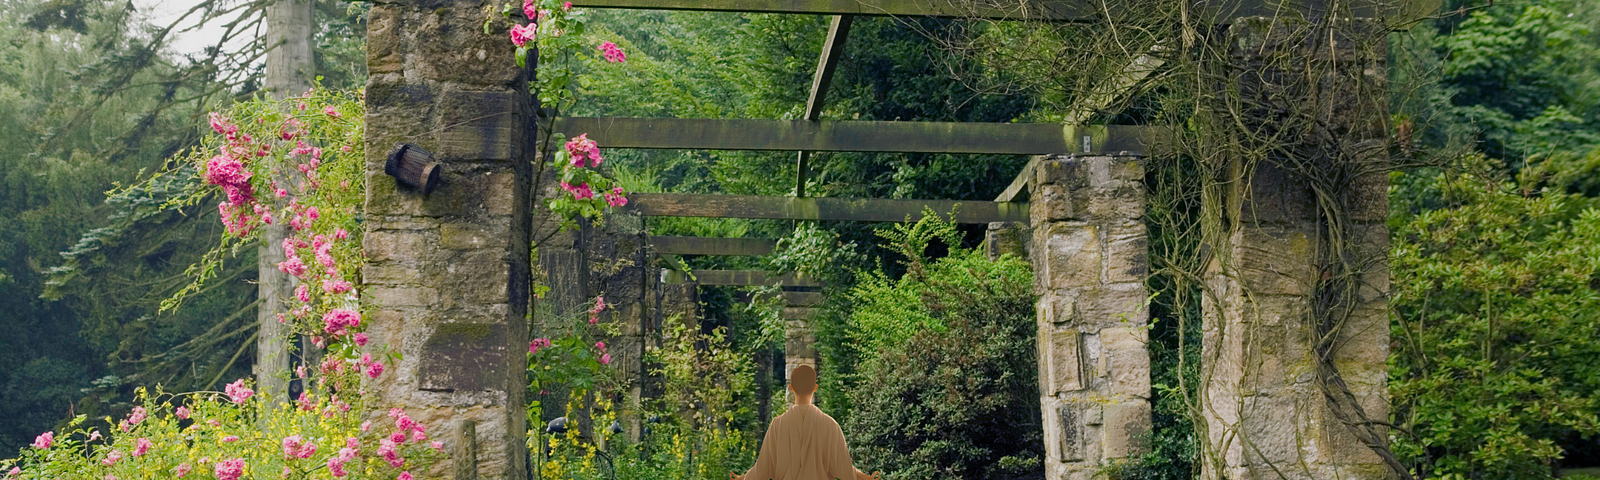 A person sits in meditation down a pathway accented by flowered archways and stepping stones leading us in.